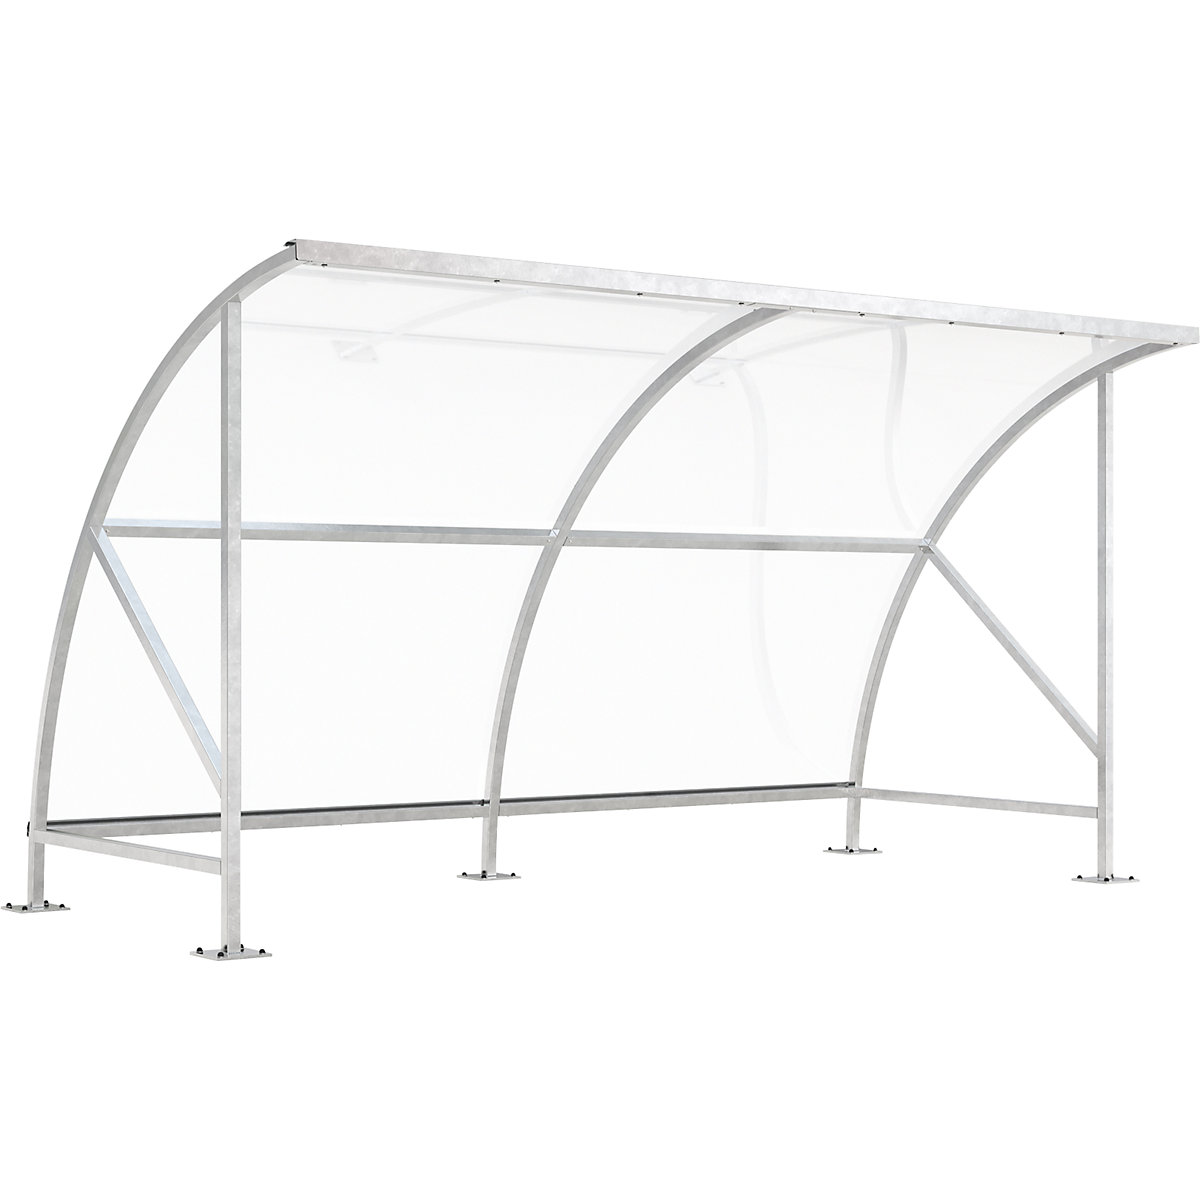 Bicycle shelter, made of polycarbonate, WxD 4130 x 2100 mm, silver-1